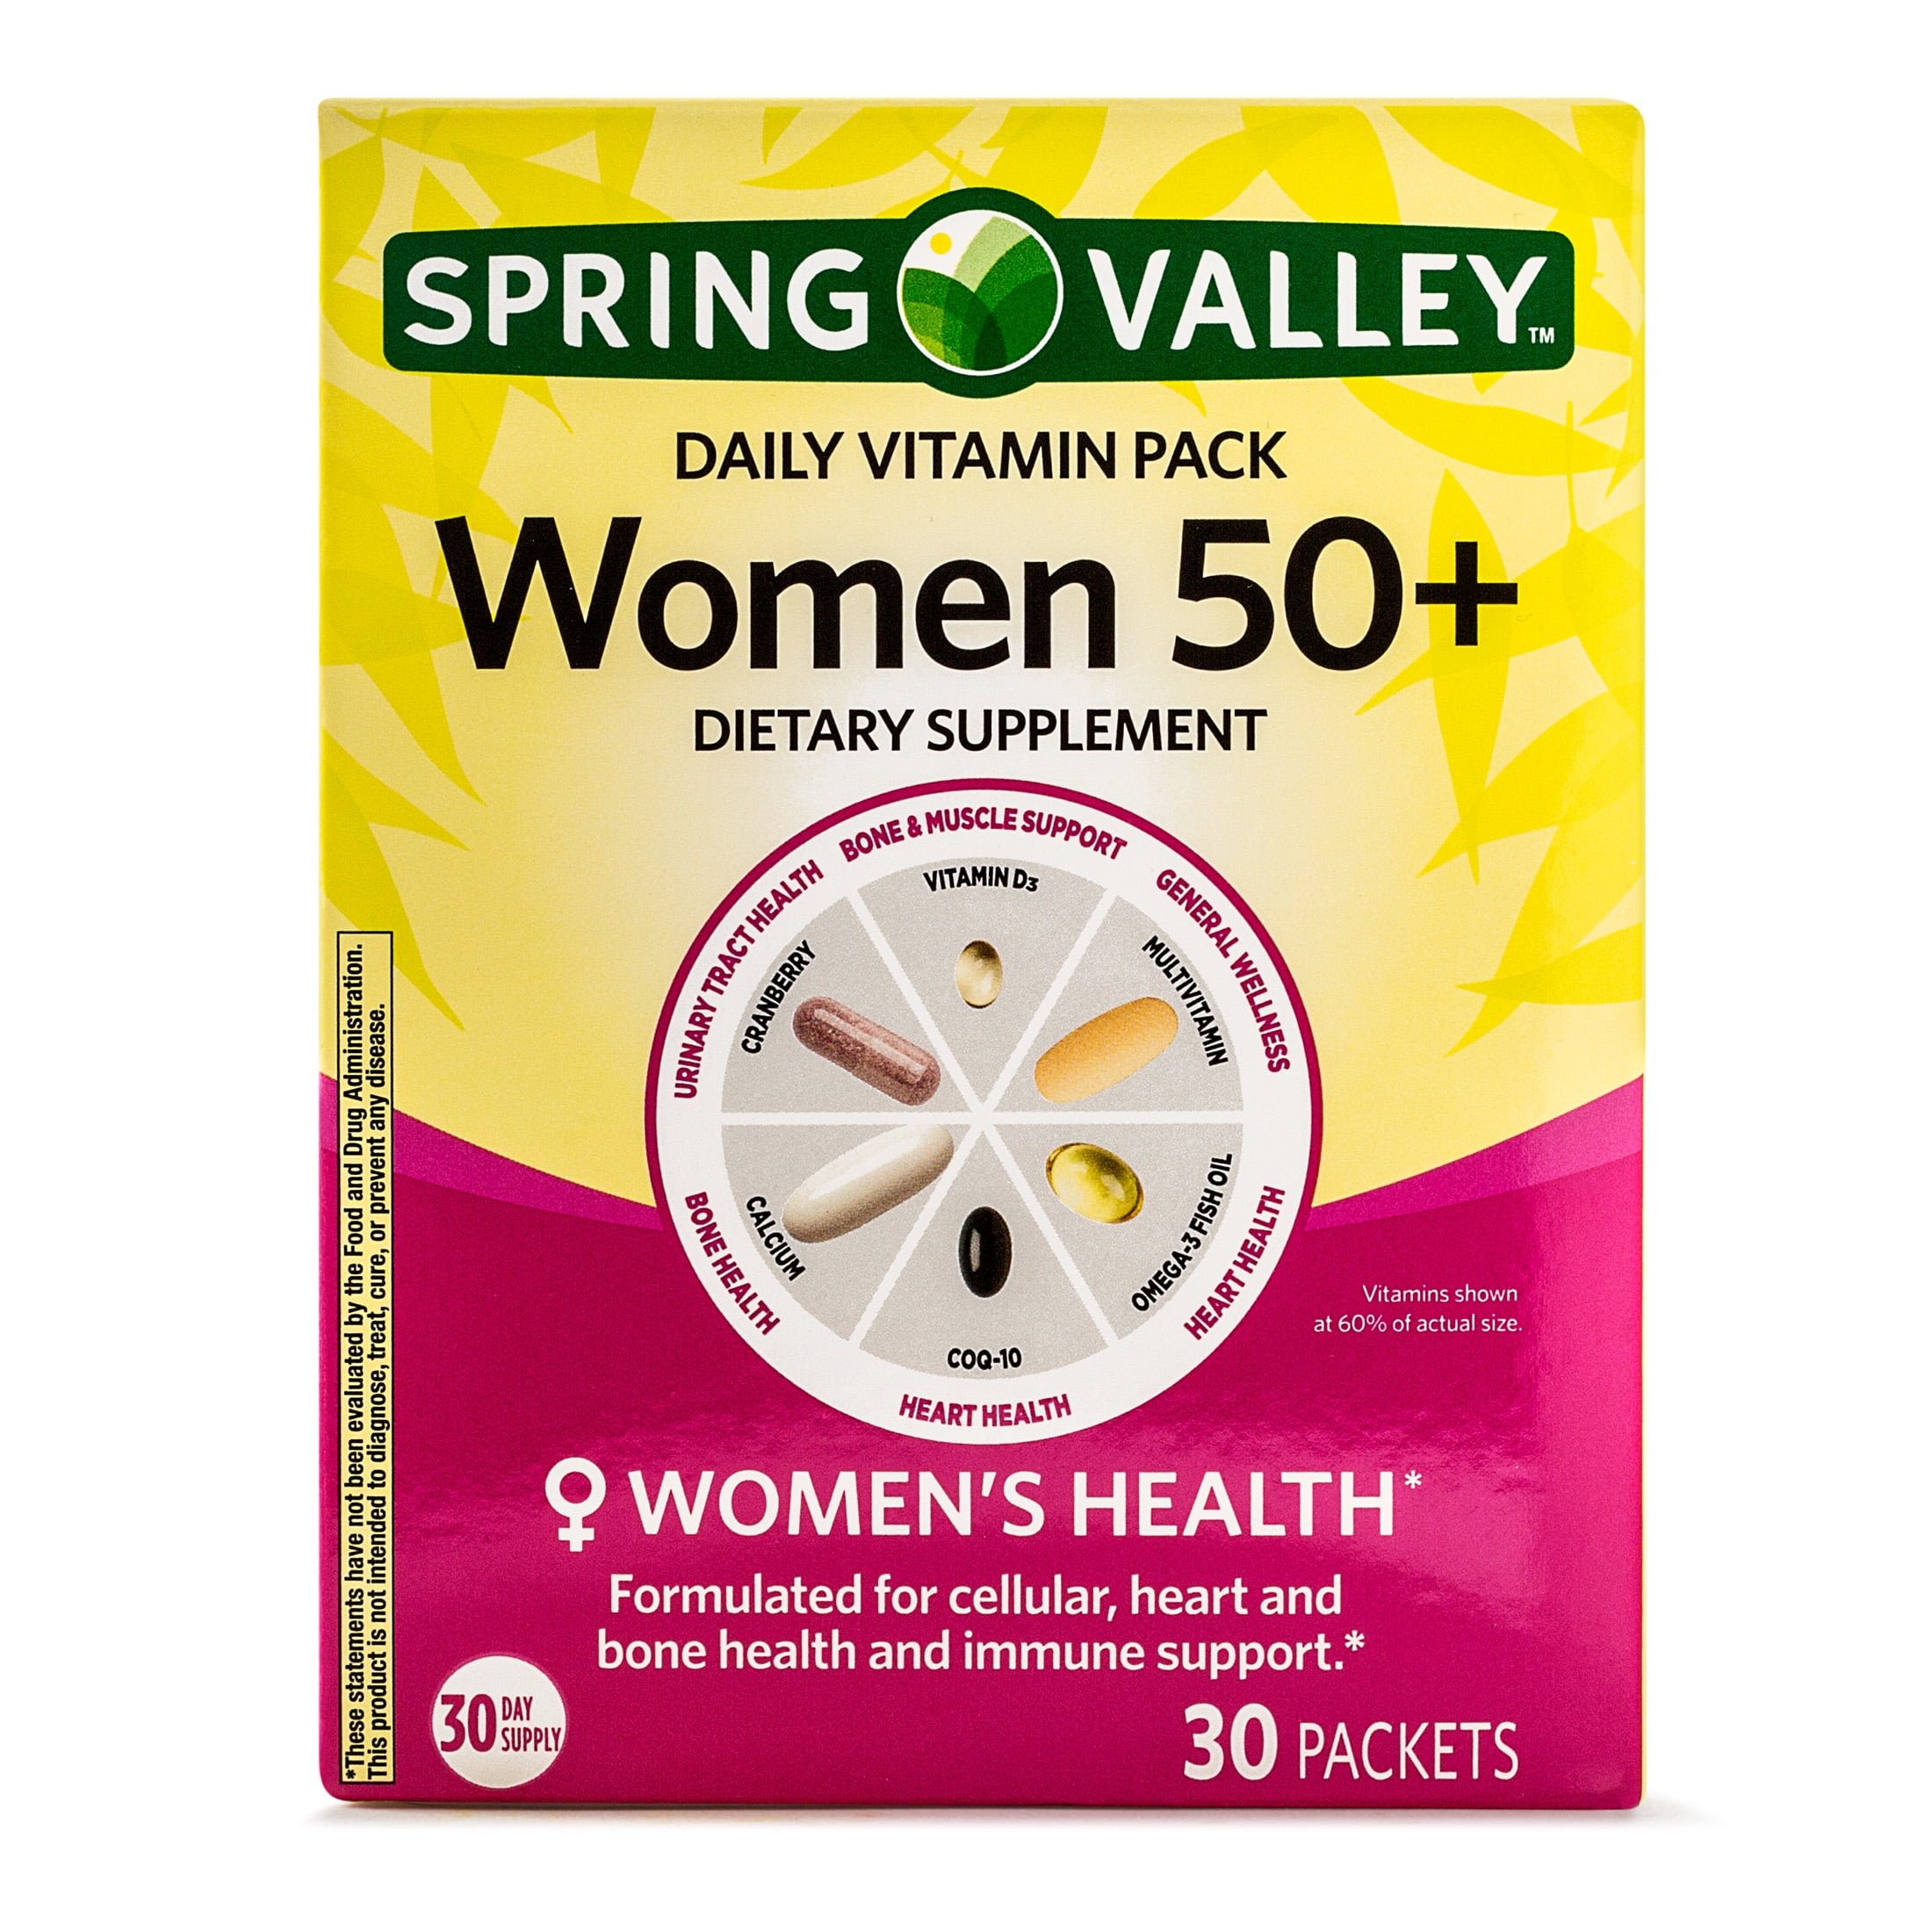 spring-valley-women-50-daily-vitamin-and-mineral-dietary-supplement